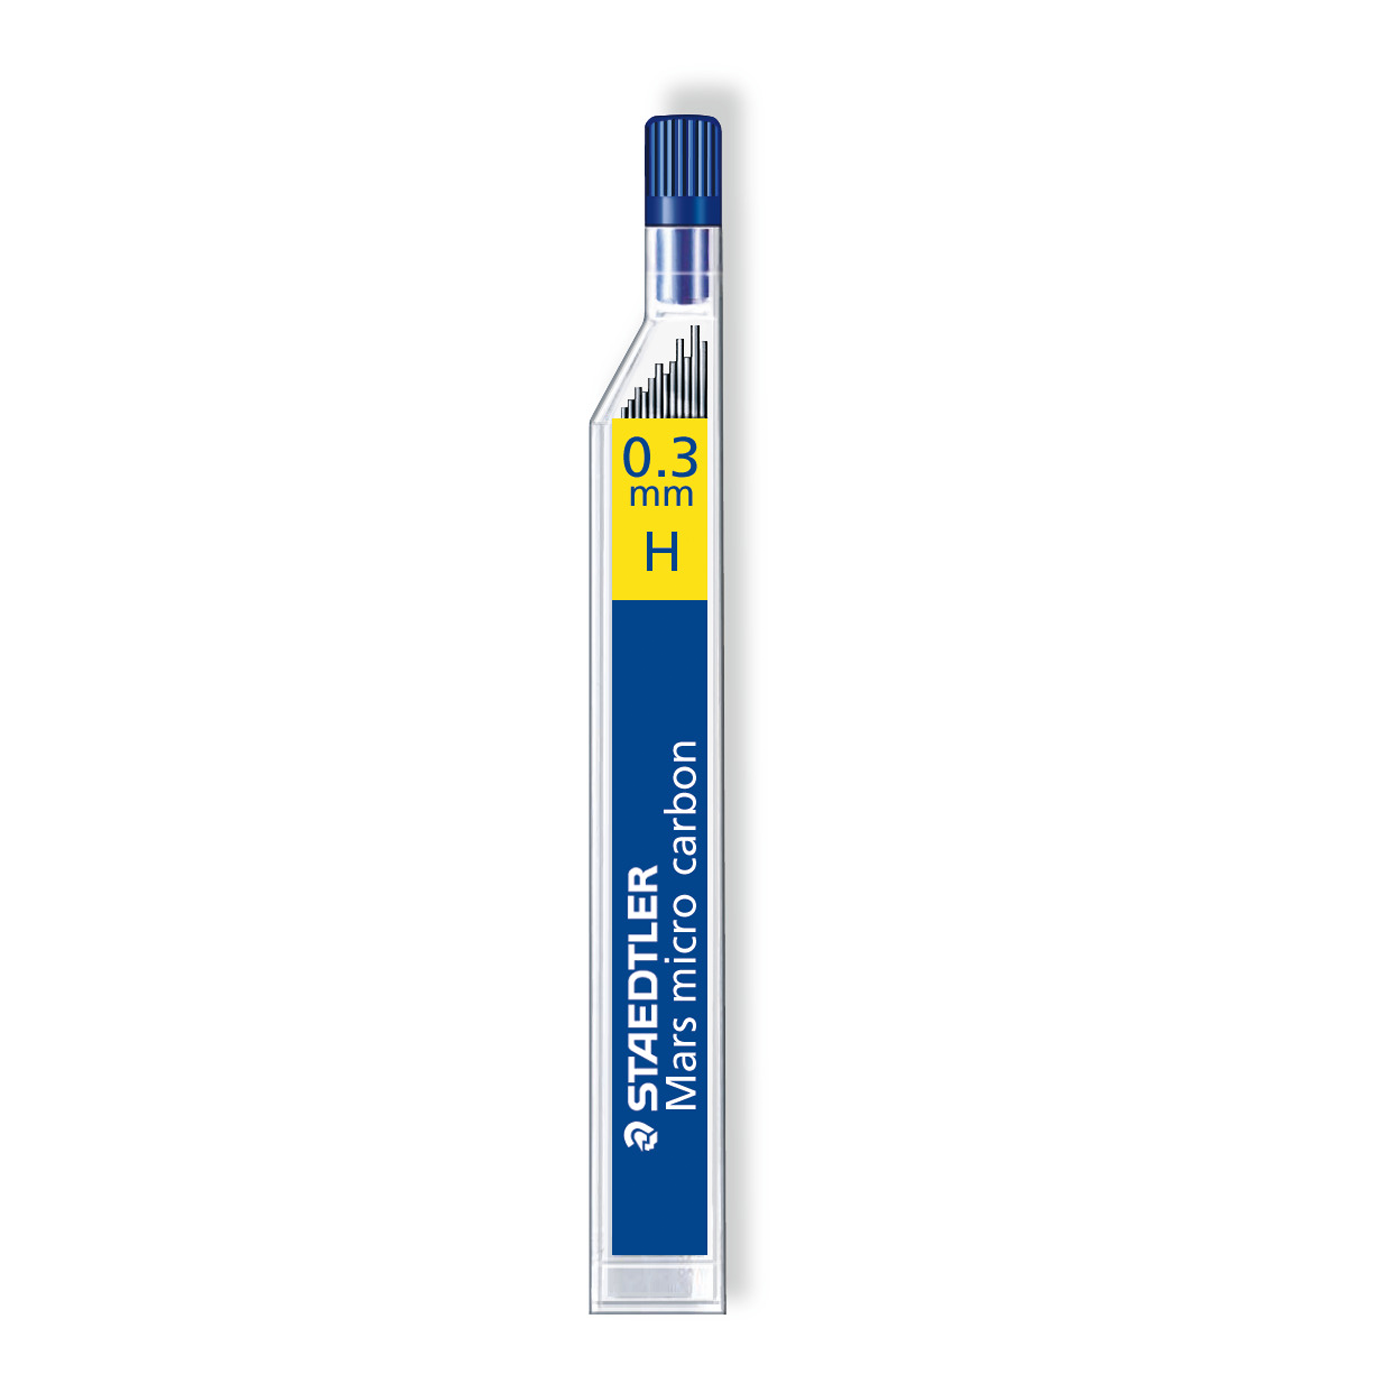 Staedtler Mechanical Pencil Leads Refill 0.3mm Mars Micro Tube of 12 H